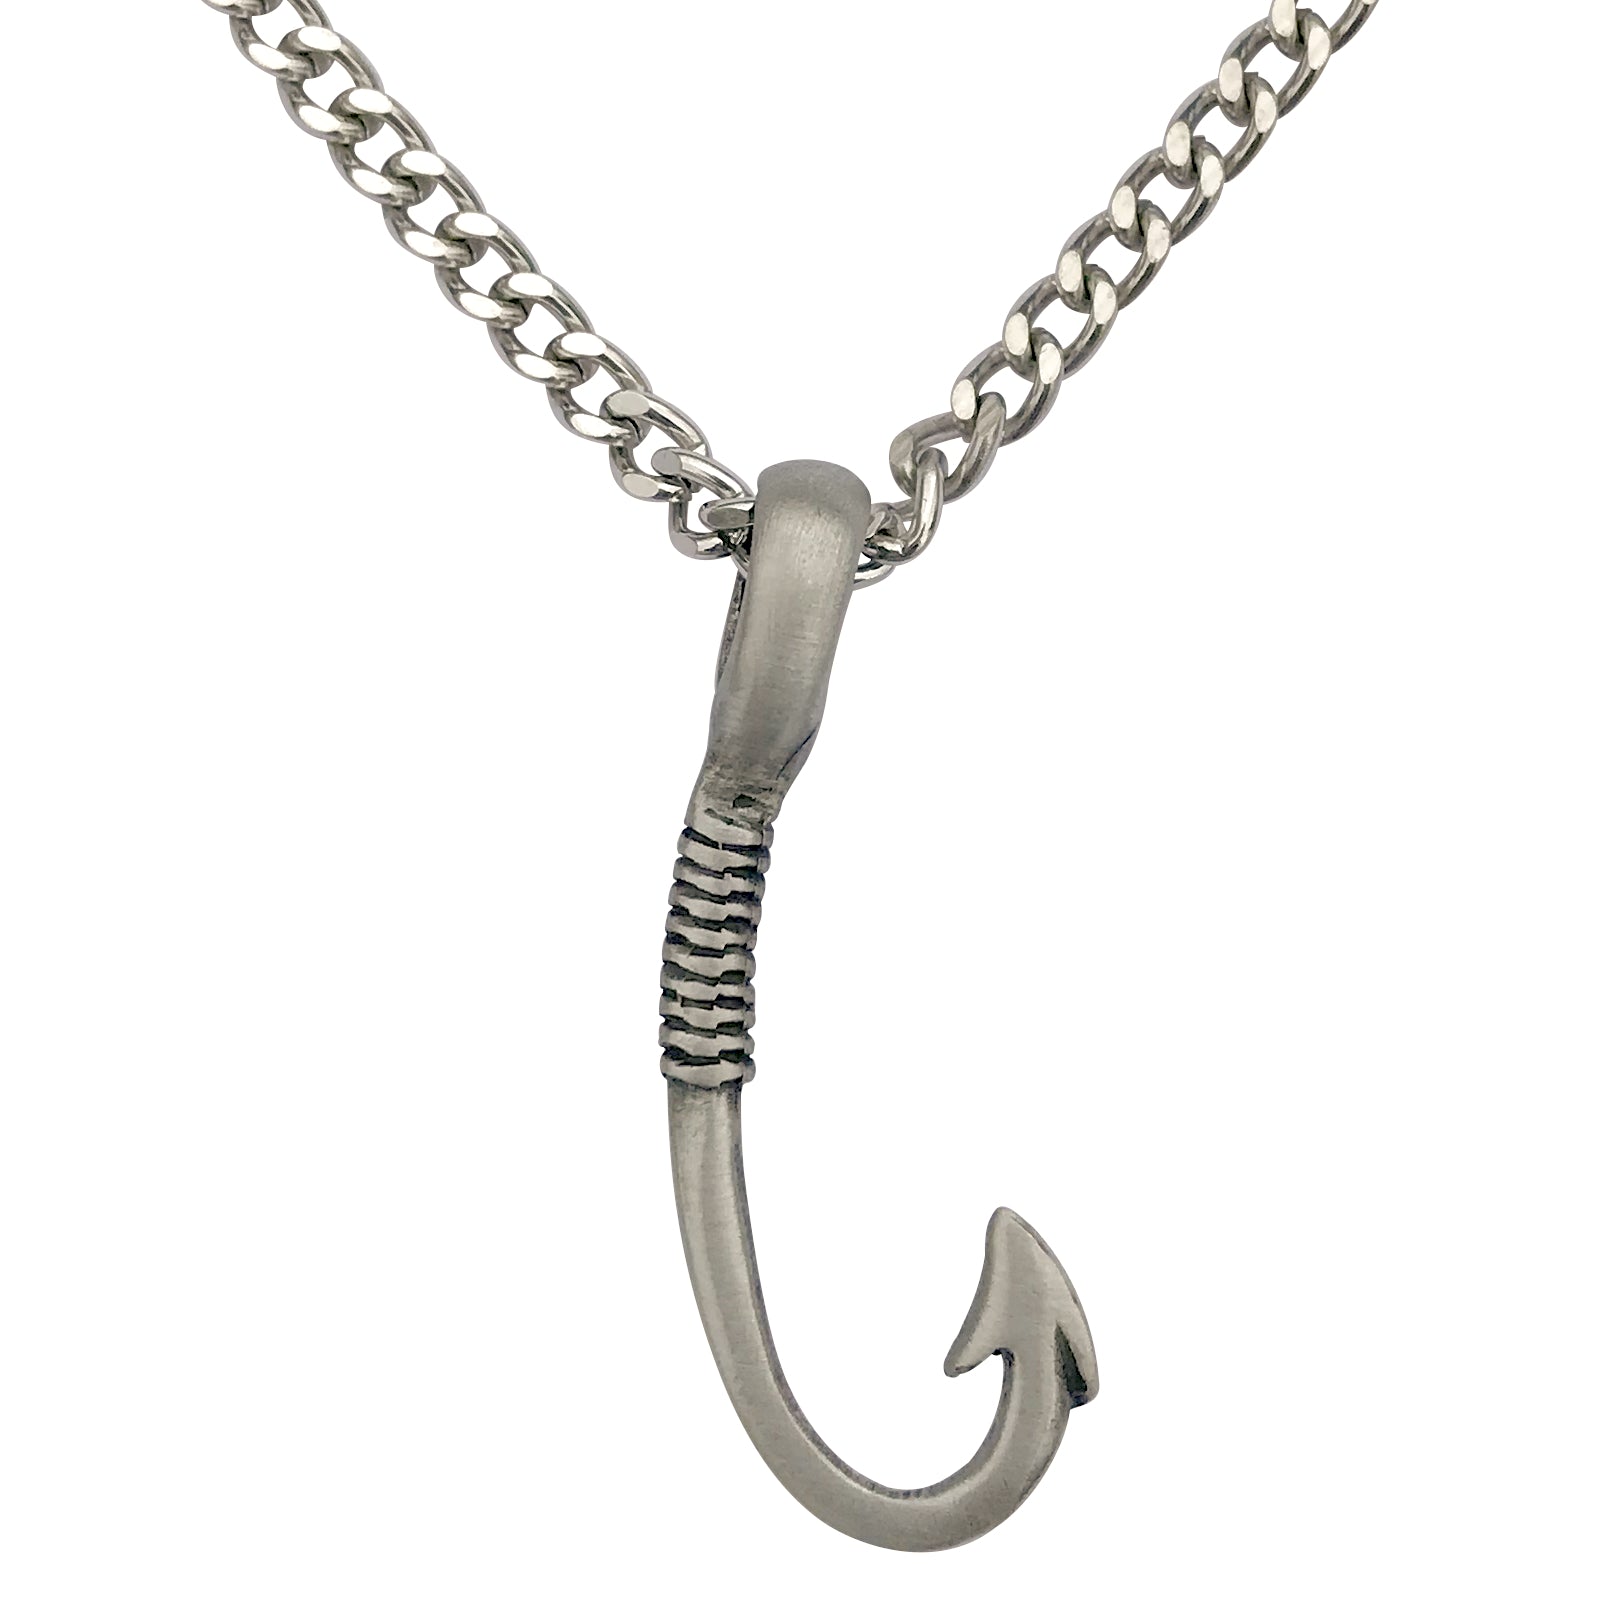 Fishing Necklace - Bullet Necklace - Jewelry for Men - SureShot Jewelry